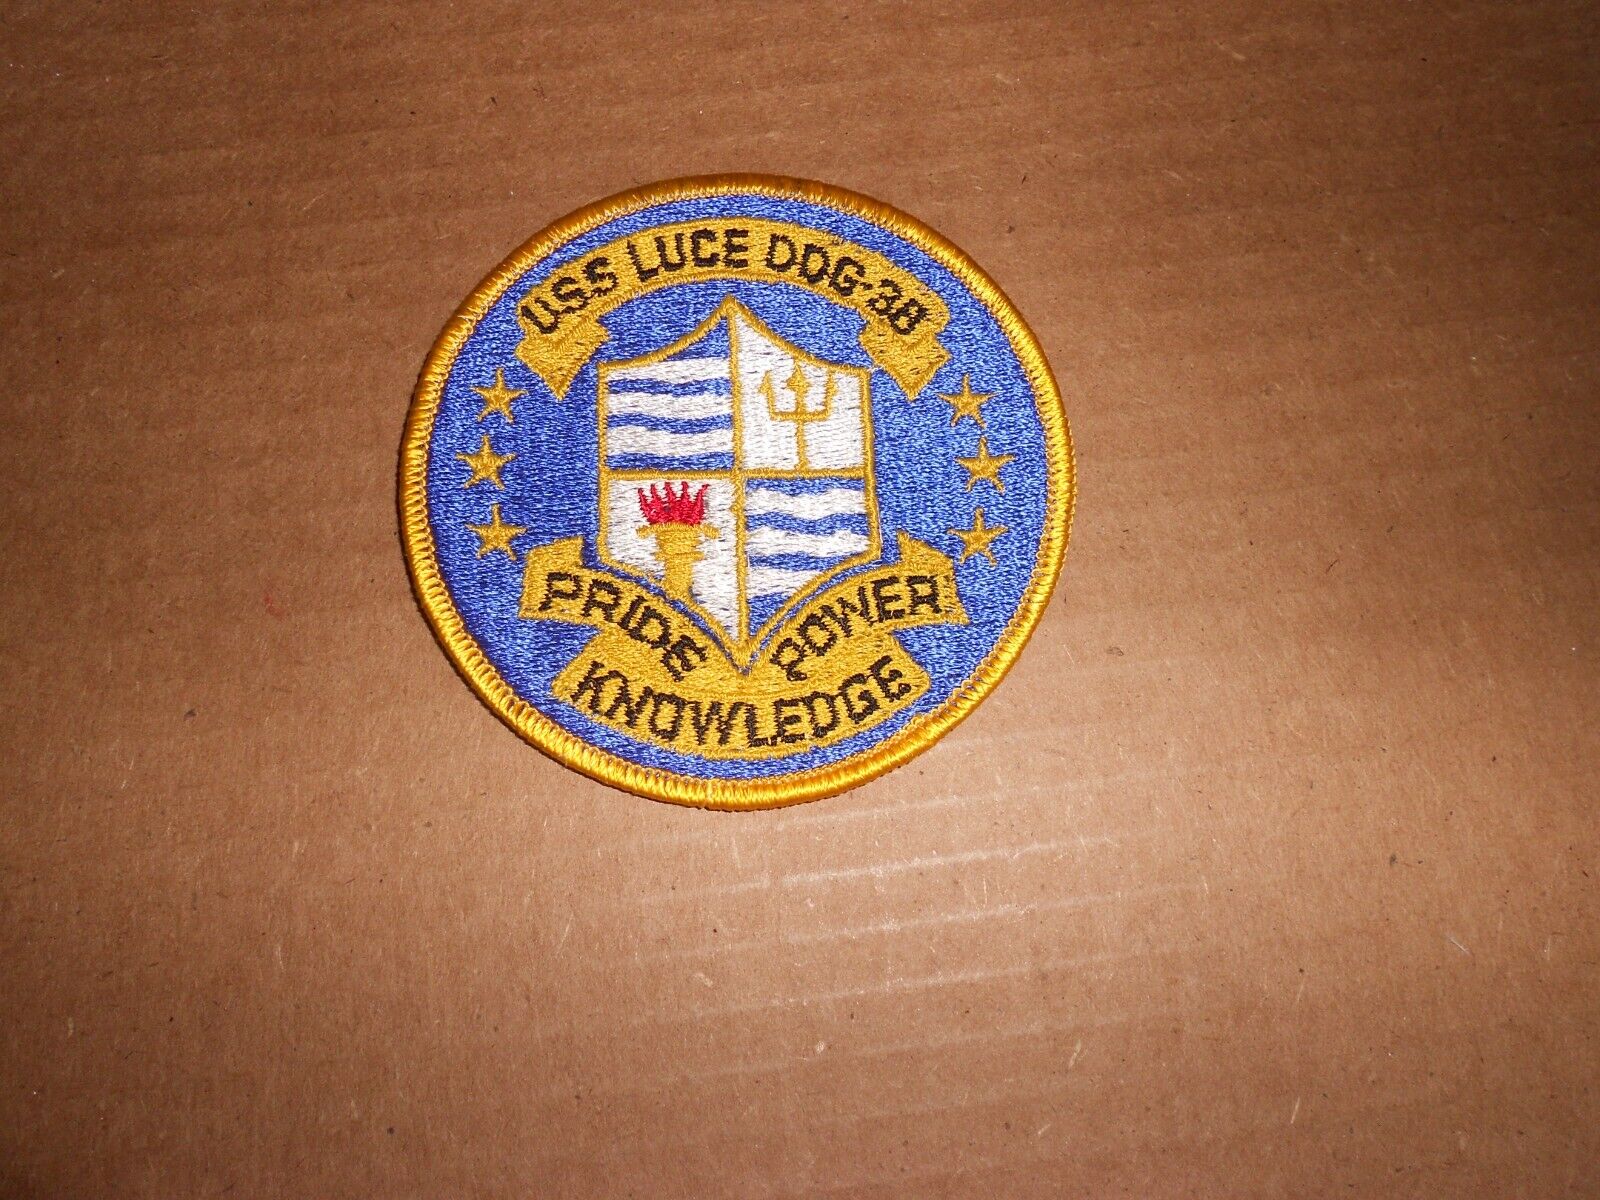 USS LUCE DDG-38 PRIDE POWER KNOWLEDGE PATCH #14